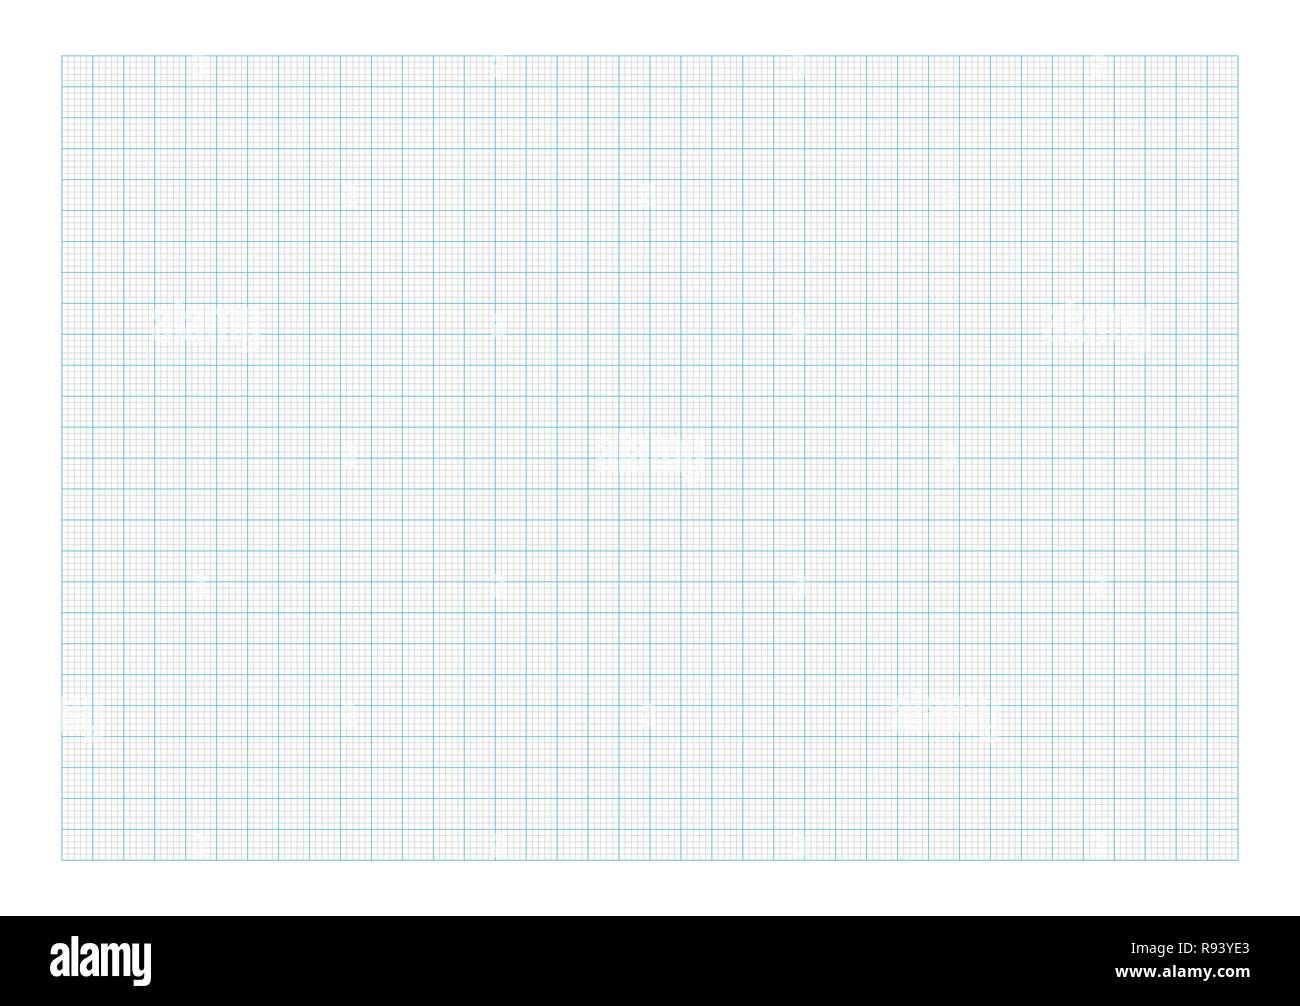 A5 size graph paper. Stock Vector